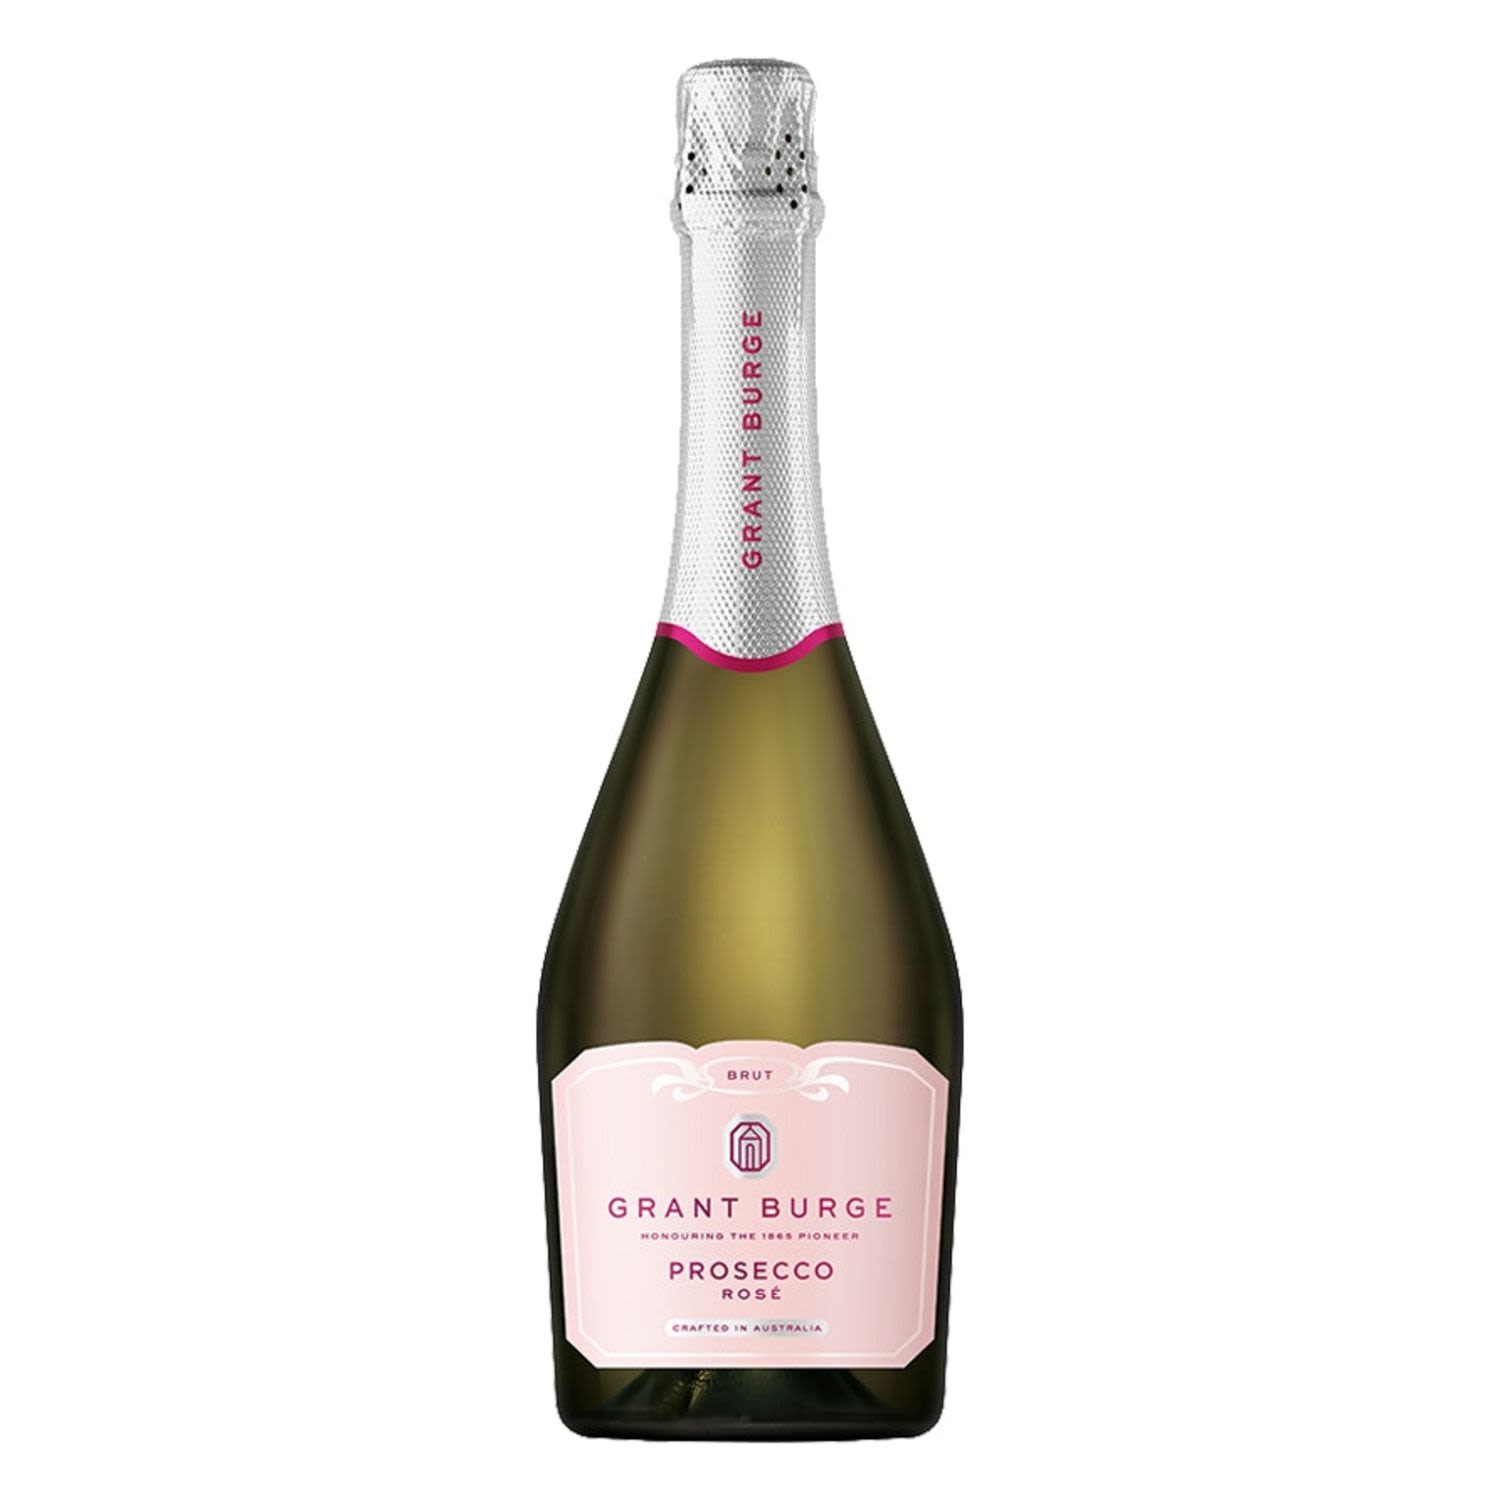 Grant Burge Prosecco Rose shows soft red fruits with a bright minerality and slightly savoury nature. Dry in taste, with just a hint of tannin adding texture to the fresh and fruity style.<br /> <br />Alcohol Volume: 11.00%<br /><br />Pack Format: Bottle<br /><br />Standard Drinks: 6.5</br /><br />Pack Type: Bottle<br /><br />Country of Origin: Australia<br /><br />Region: South Eastern Australia<br /><br />Vintage: Non Vintage<br />